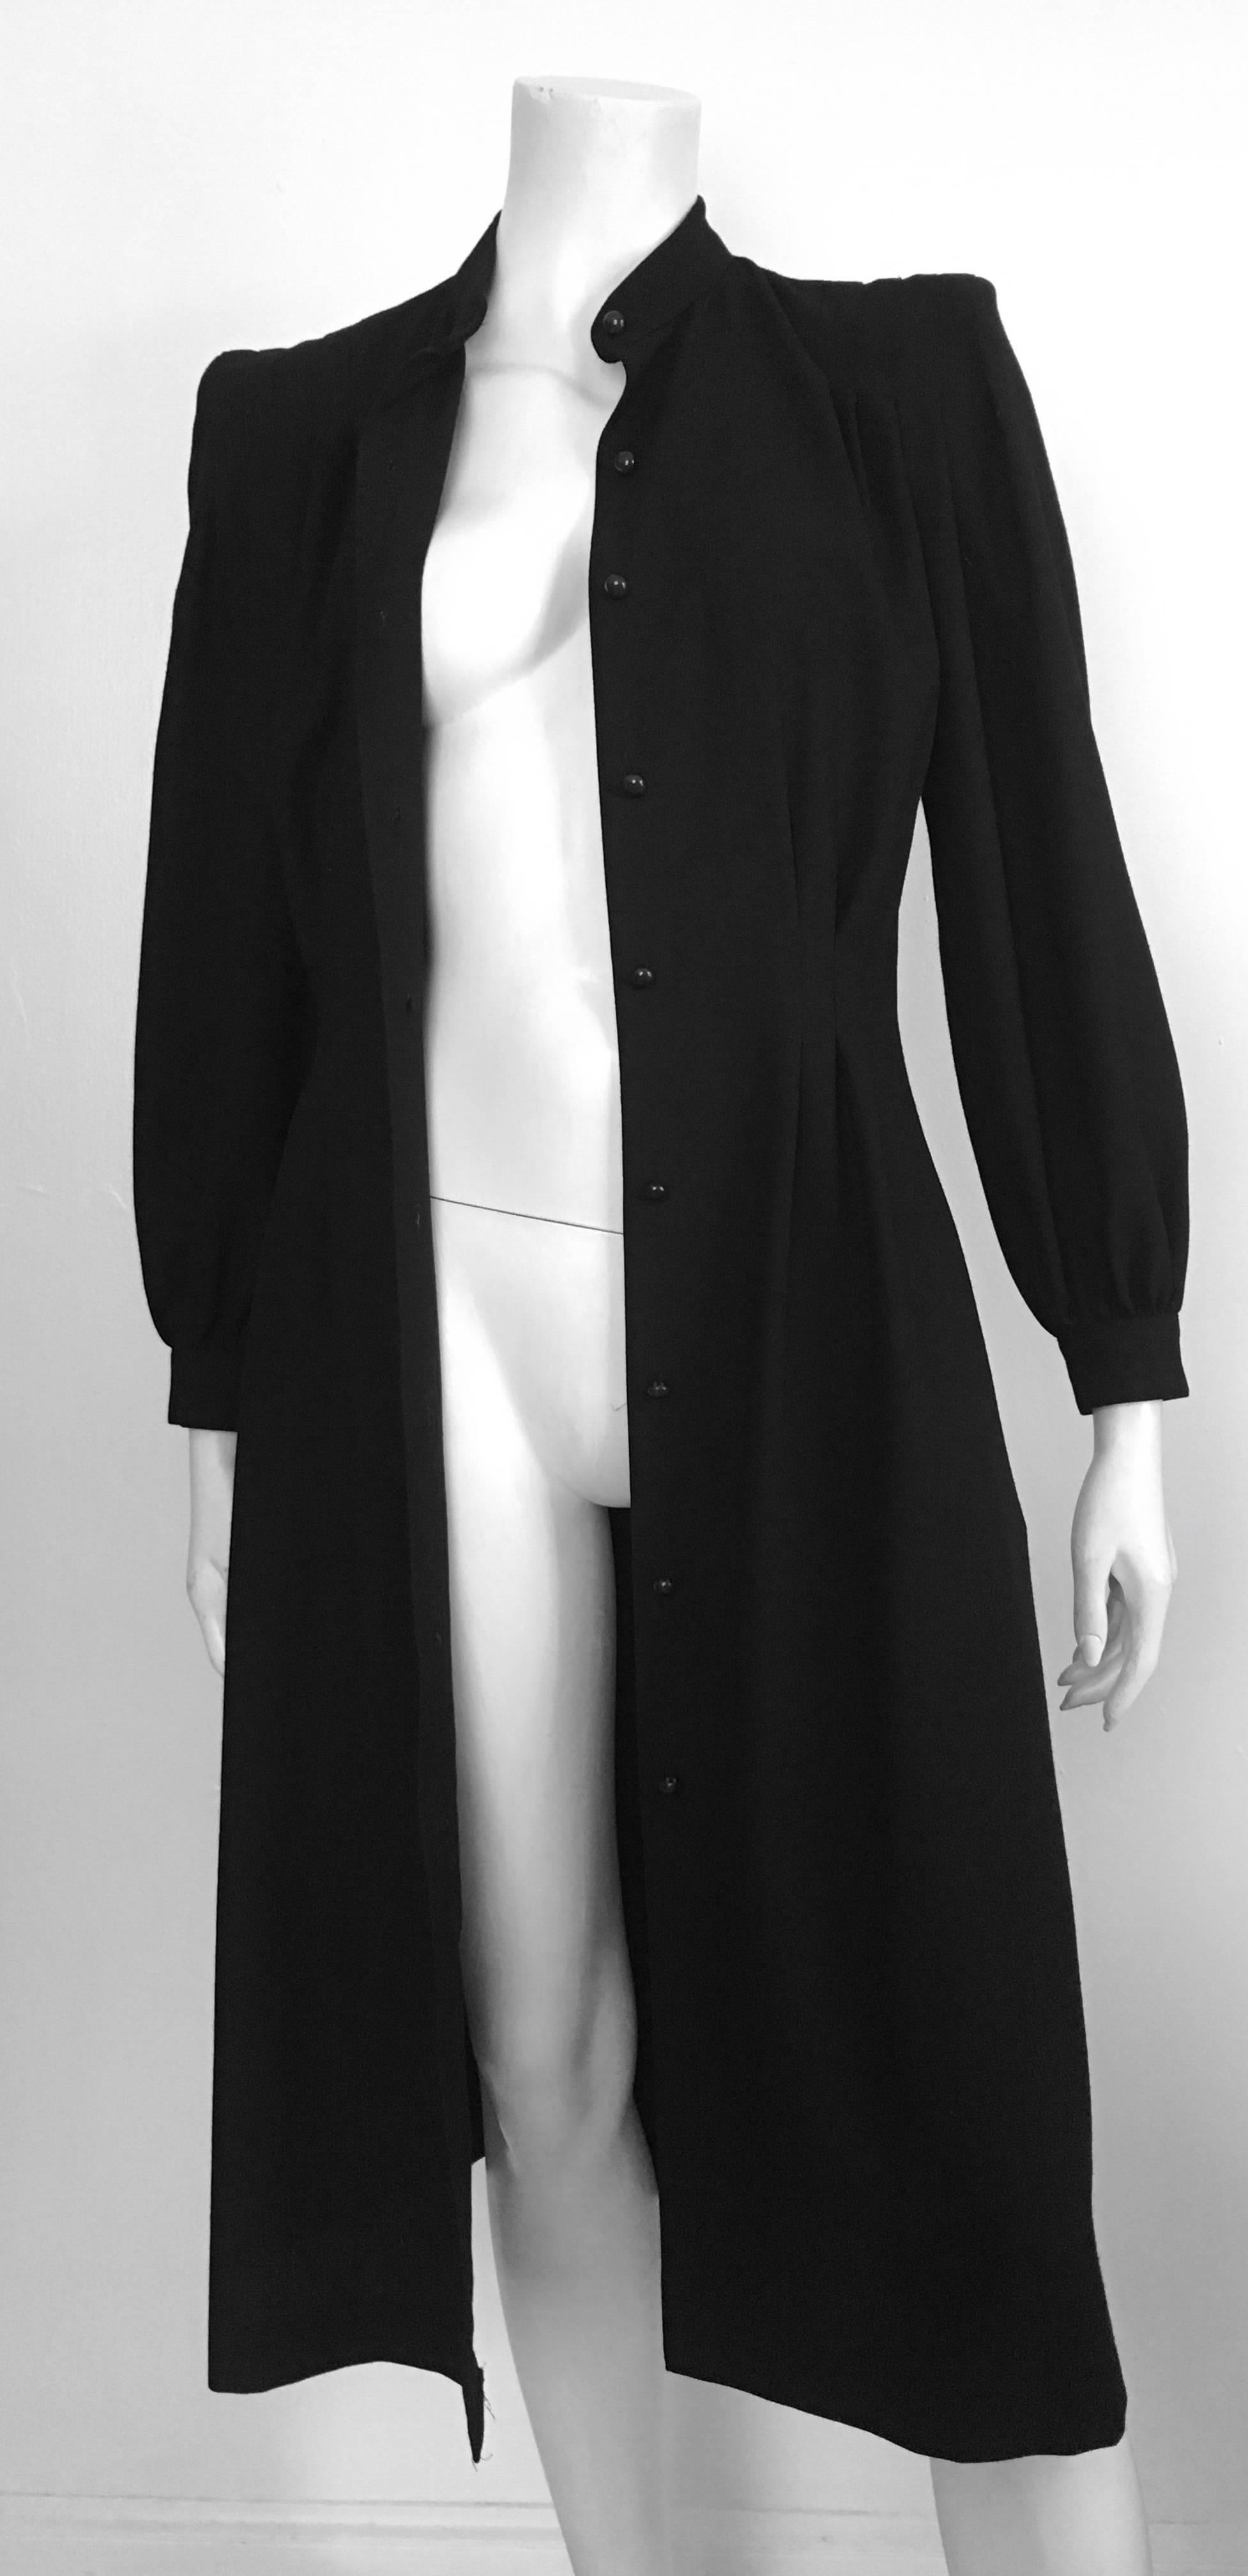 Pierre Cardin 1980s Black Wool Button Up Dress with Pockets Size 6/8. 5